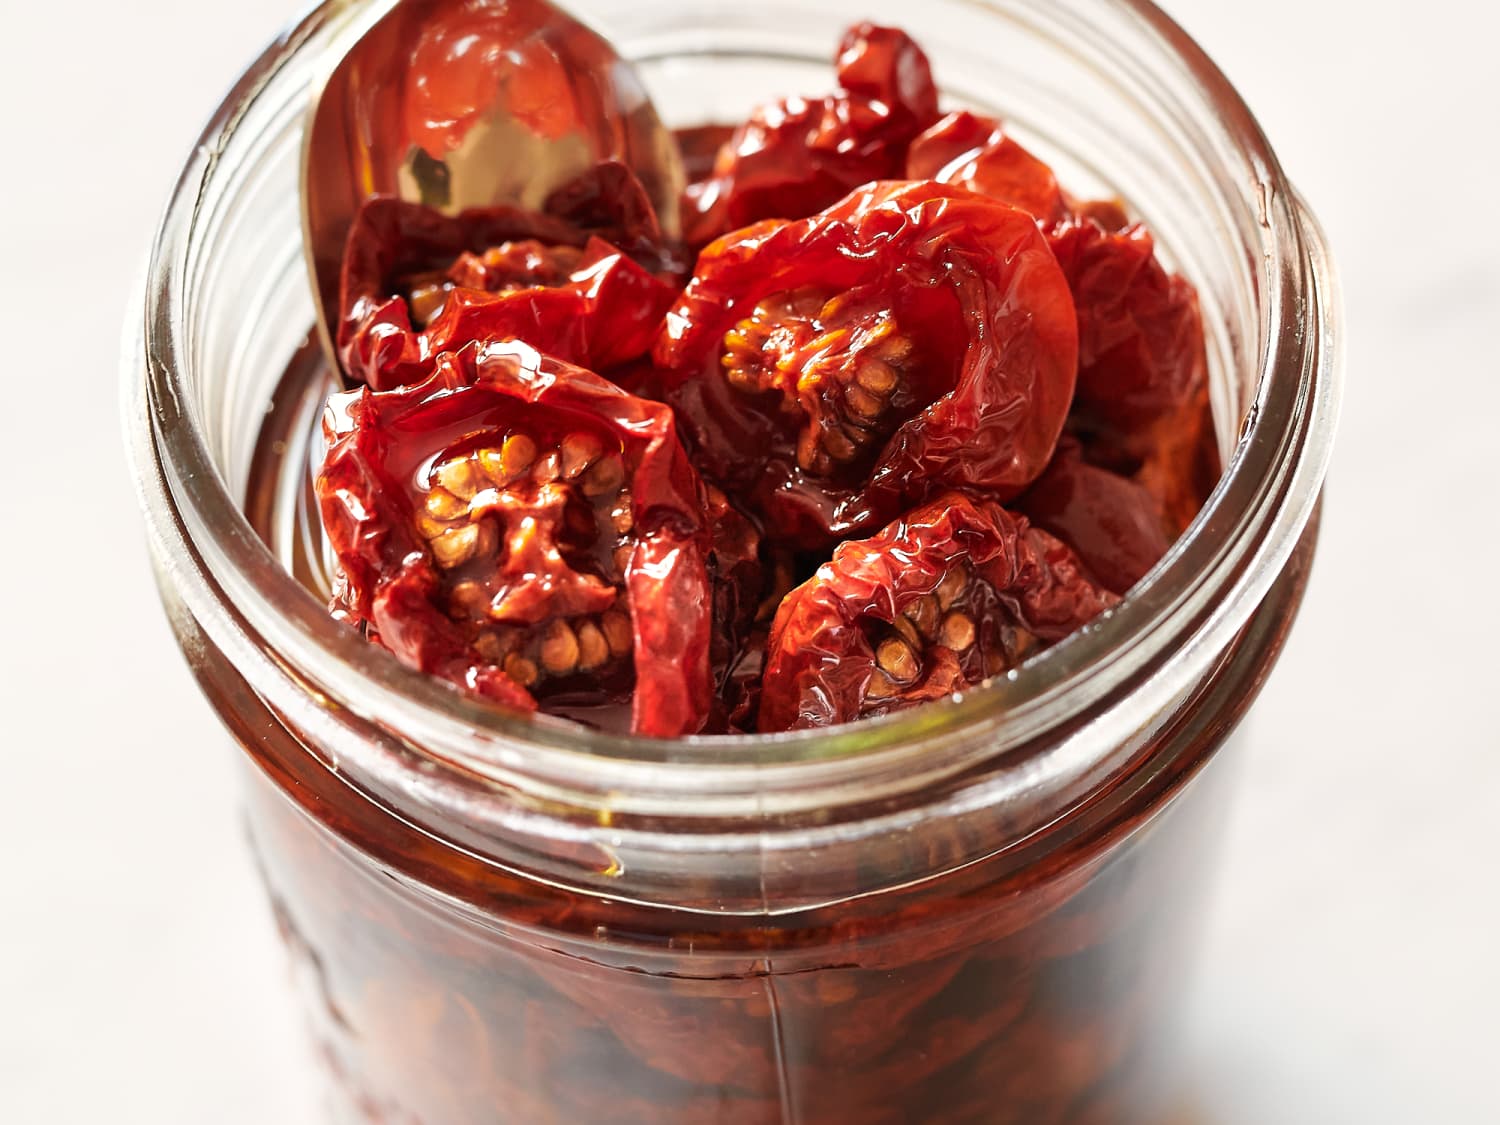 Sun-Dried Tomatoes Recipe (in the Oven)